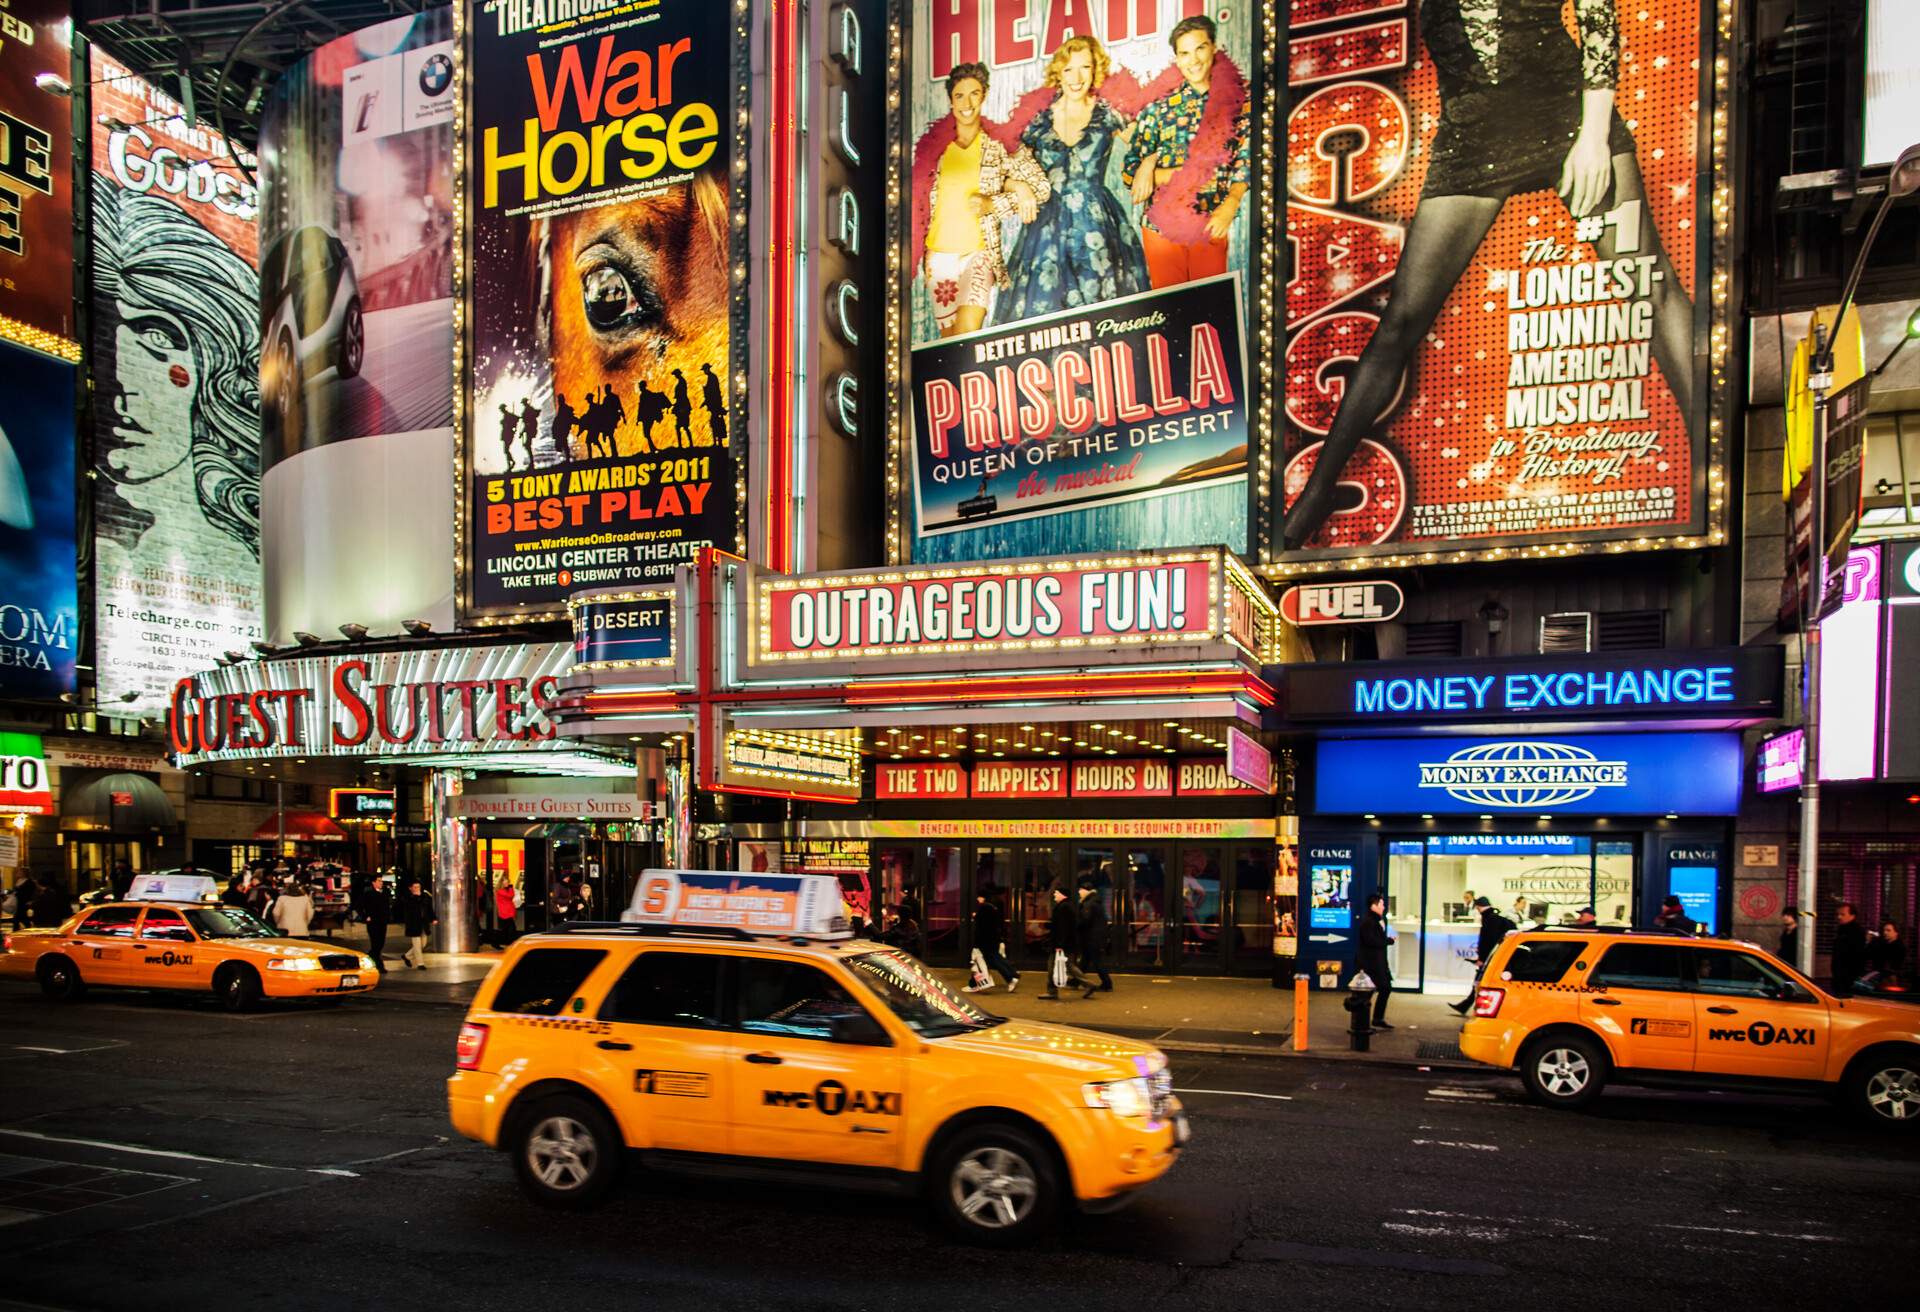 DEST_USA_NEW-YORK_BROADWAY_GettyImages-495858191